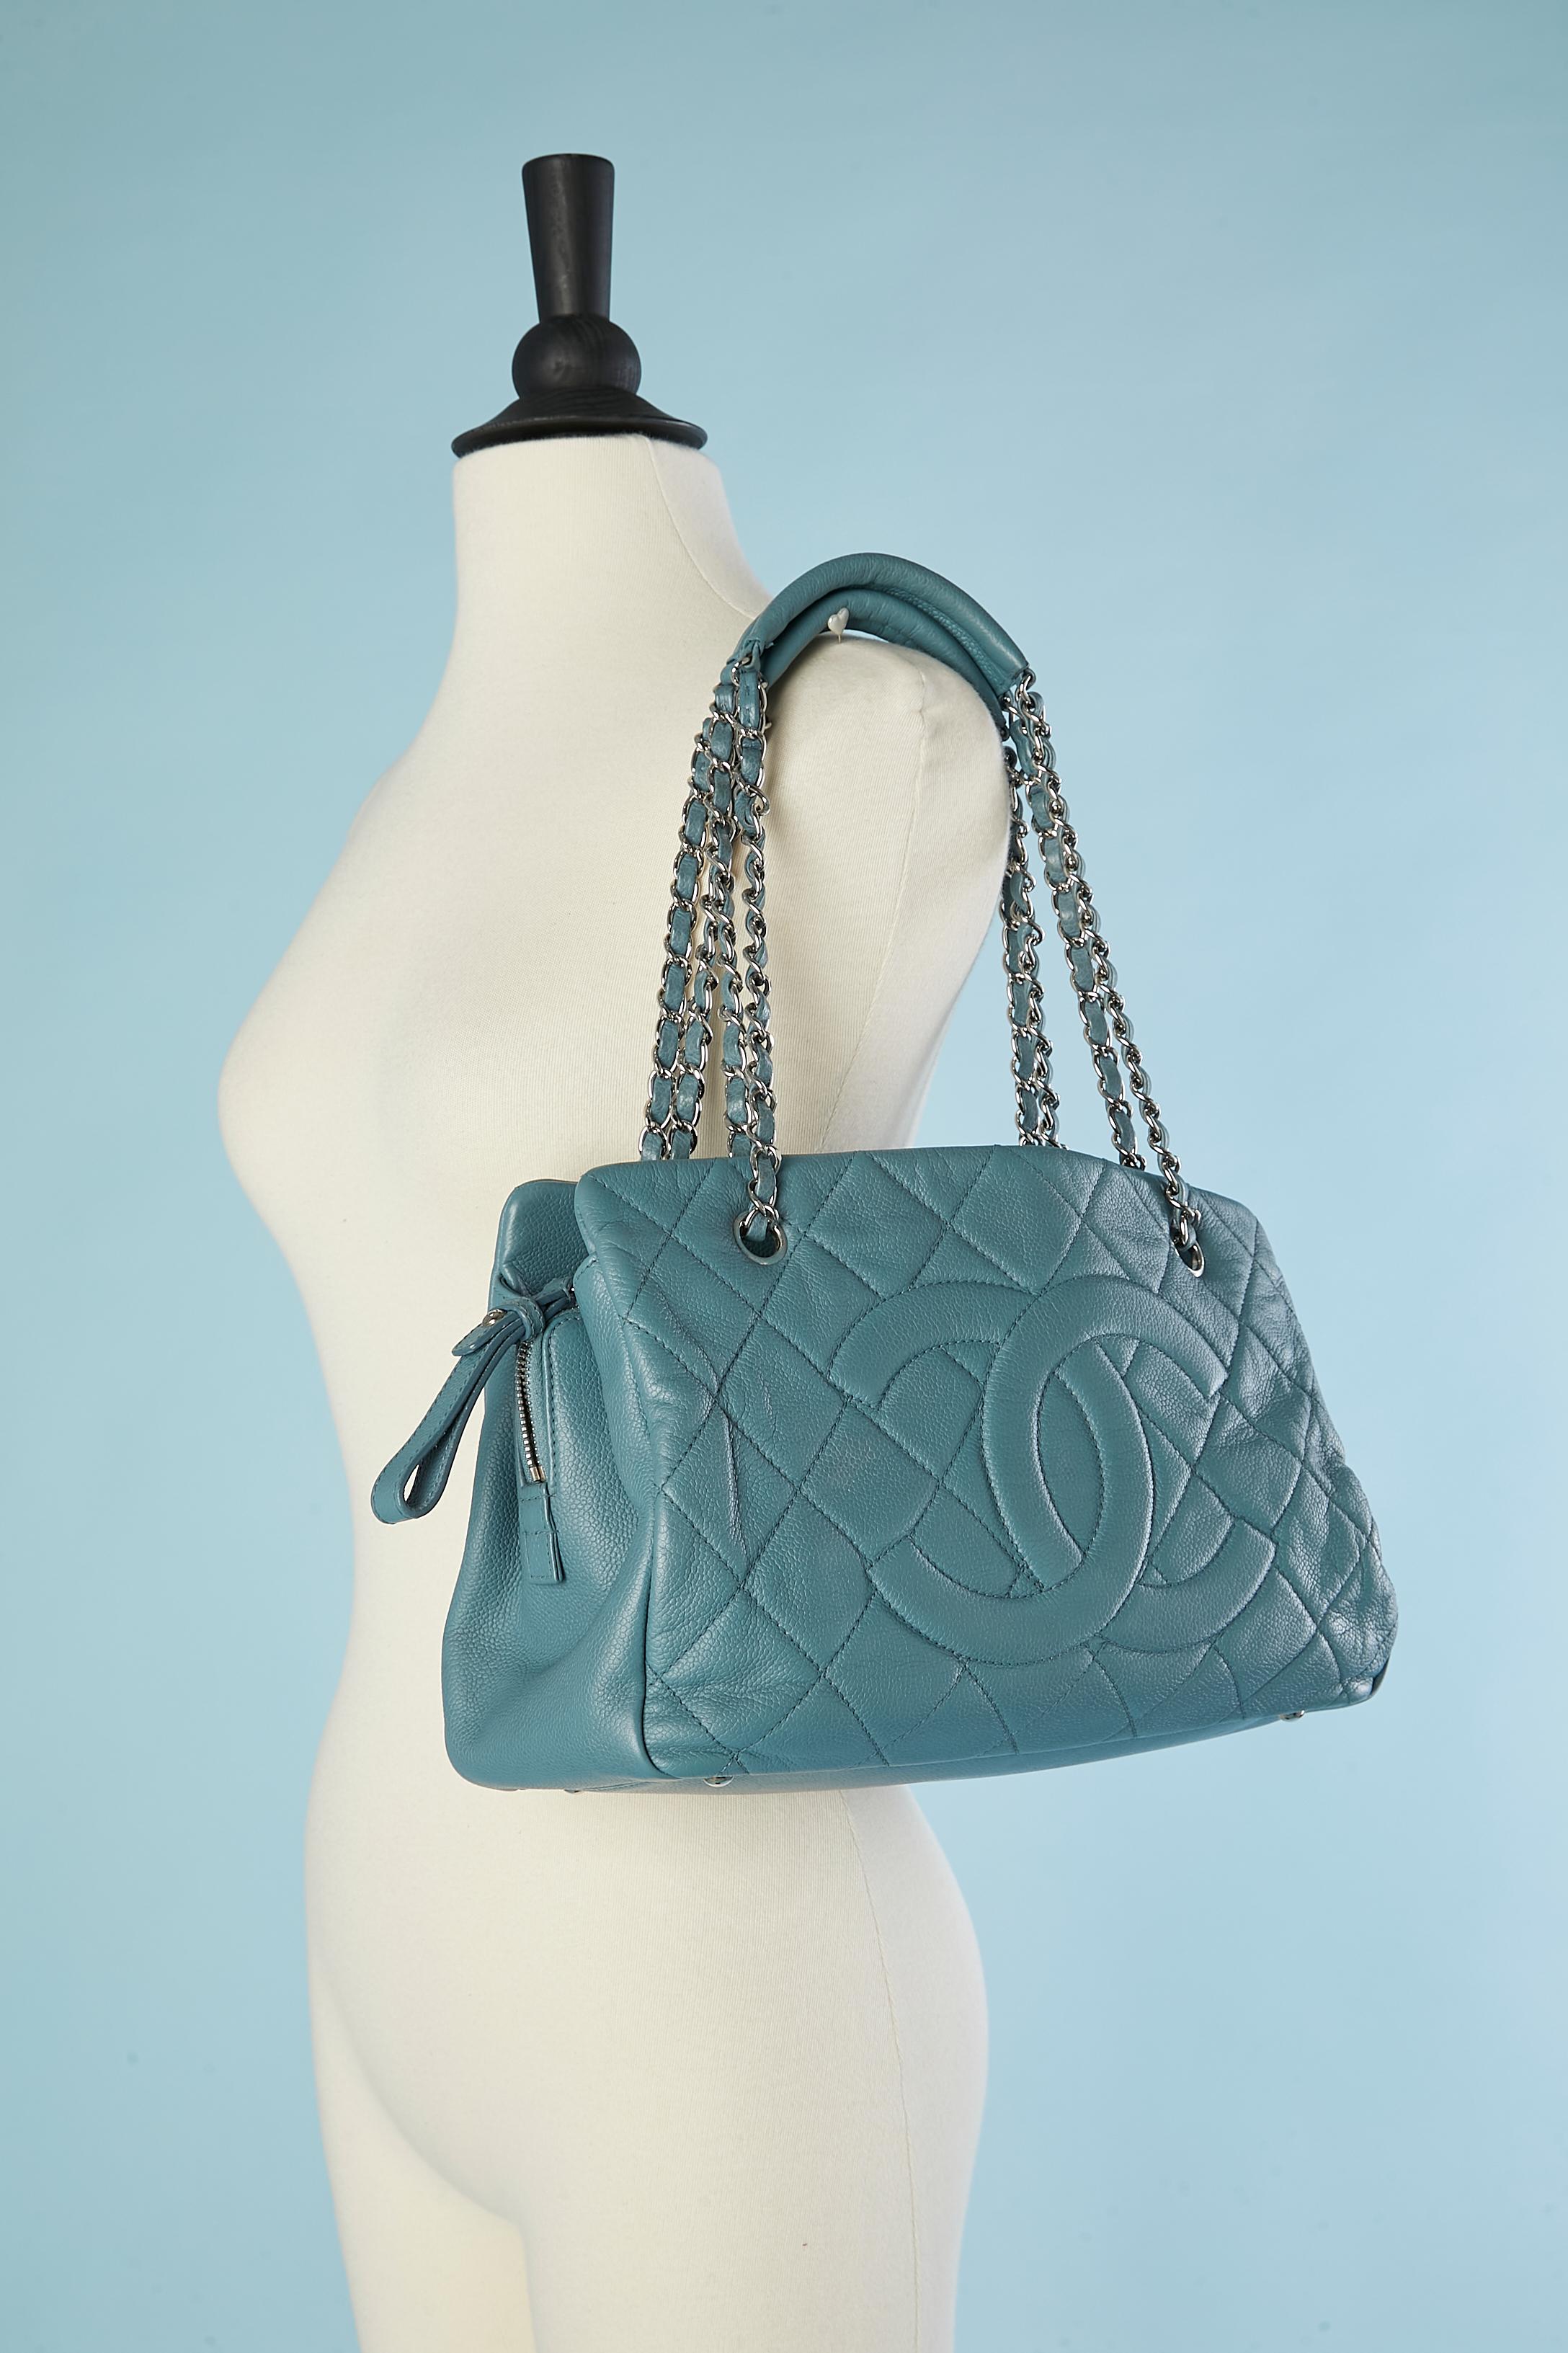 Blue topstitched leather bag with chains handles Chanel Numbered  For Sale 1